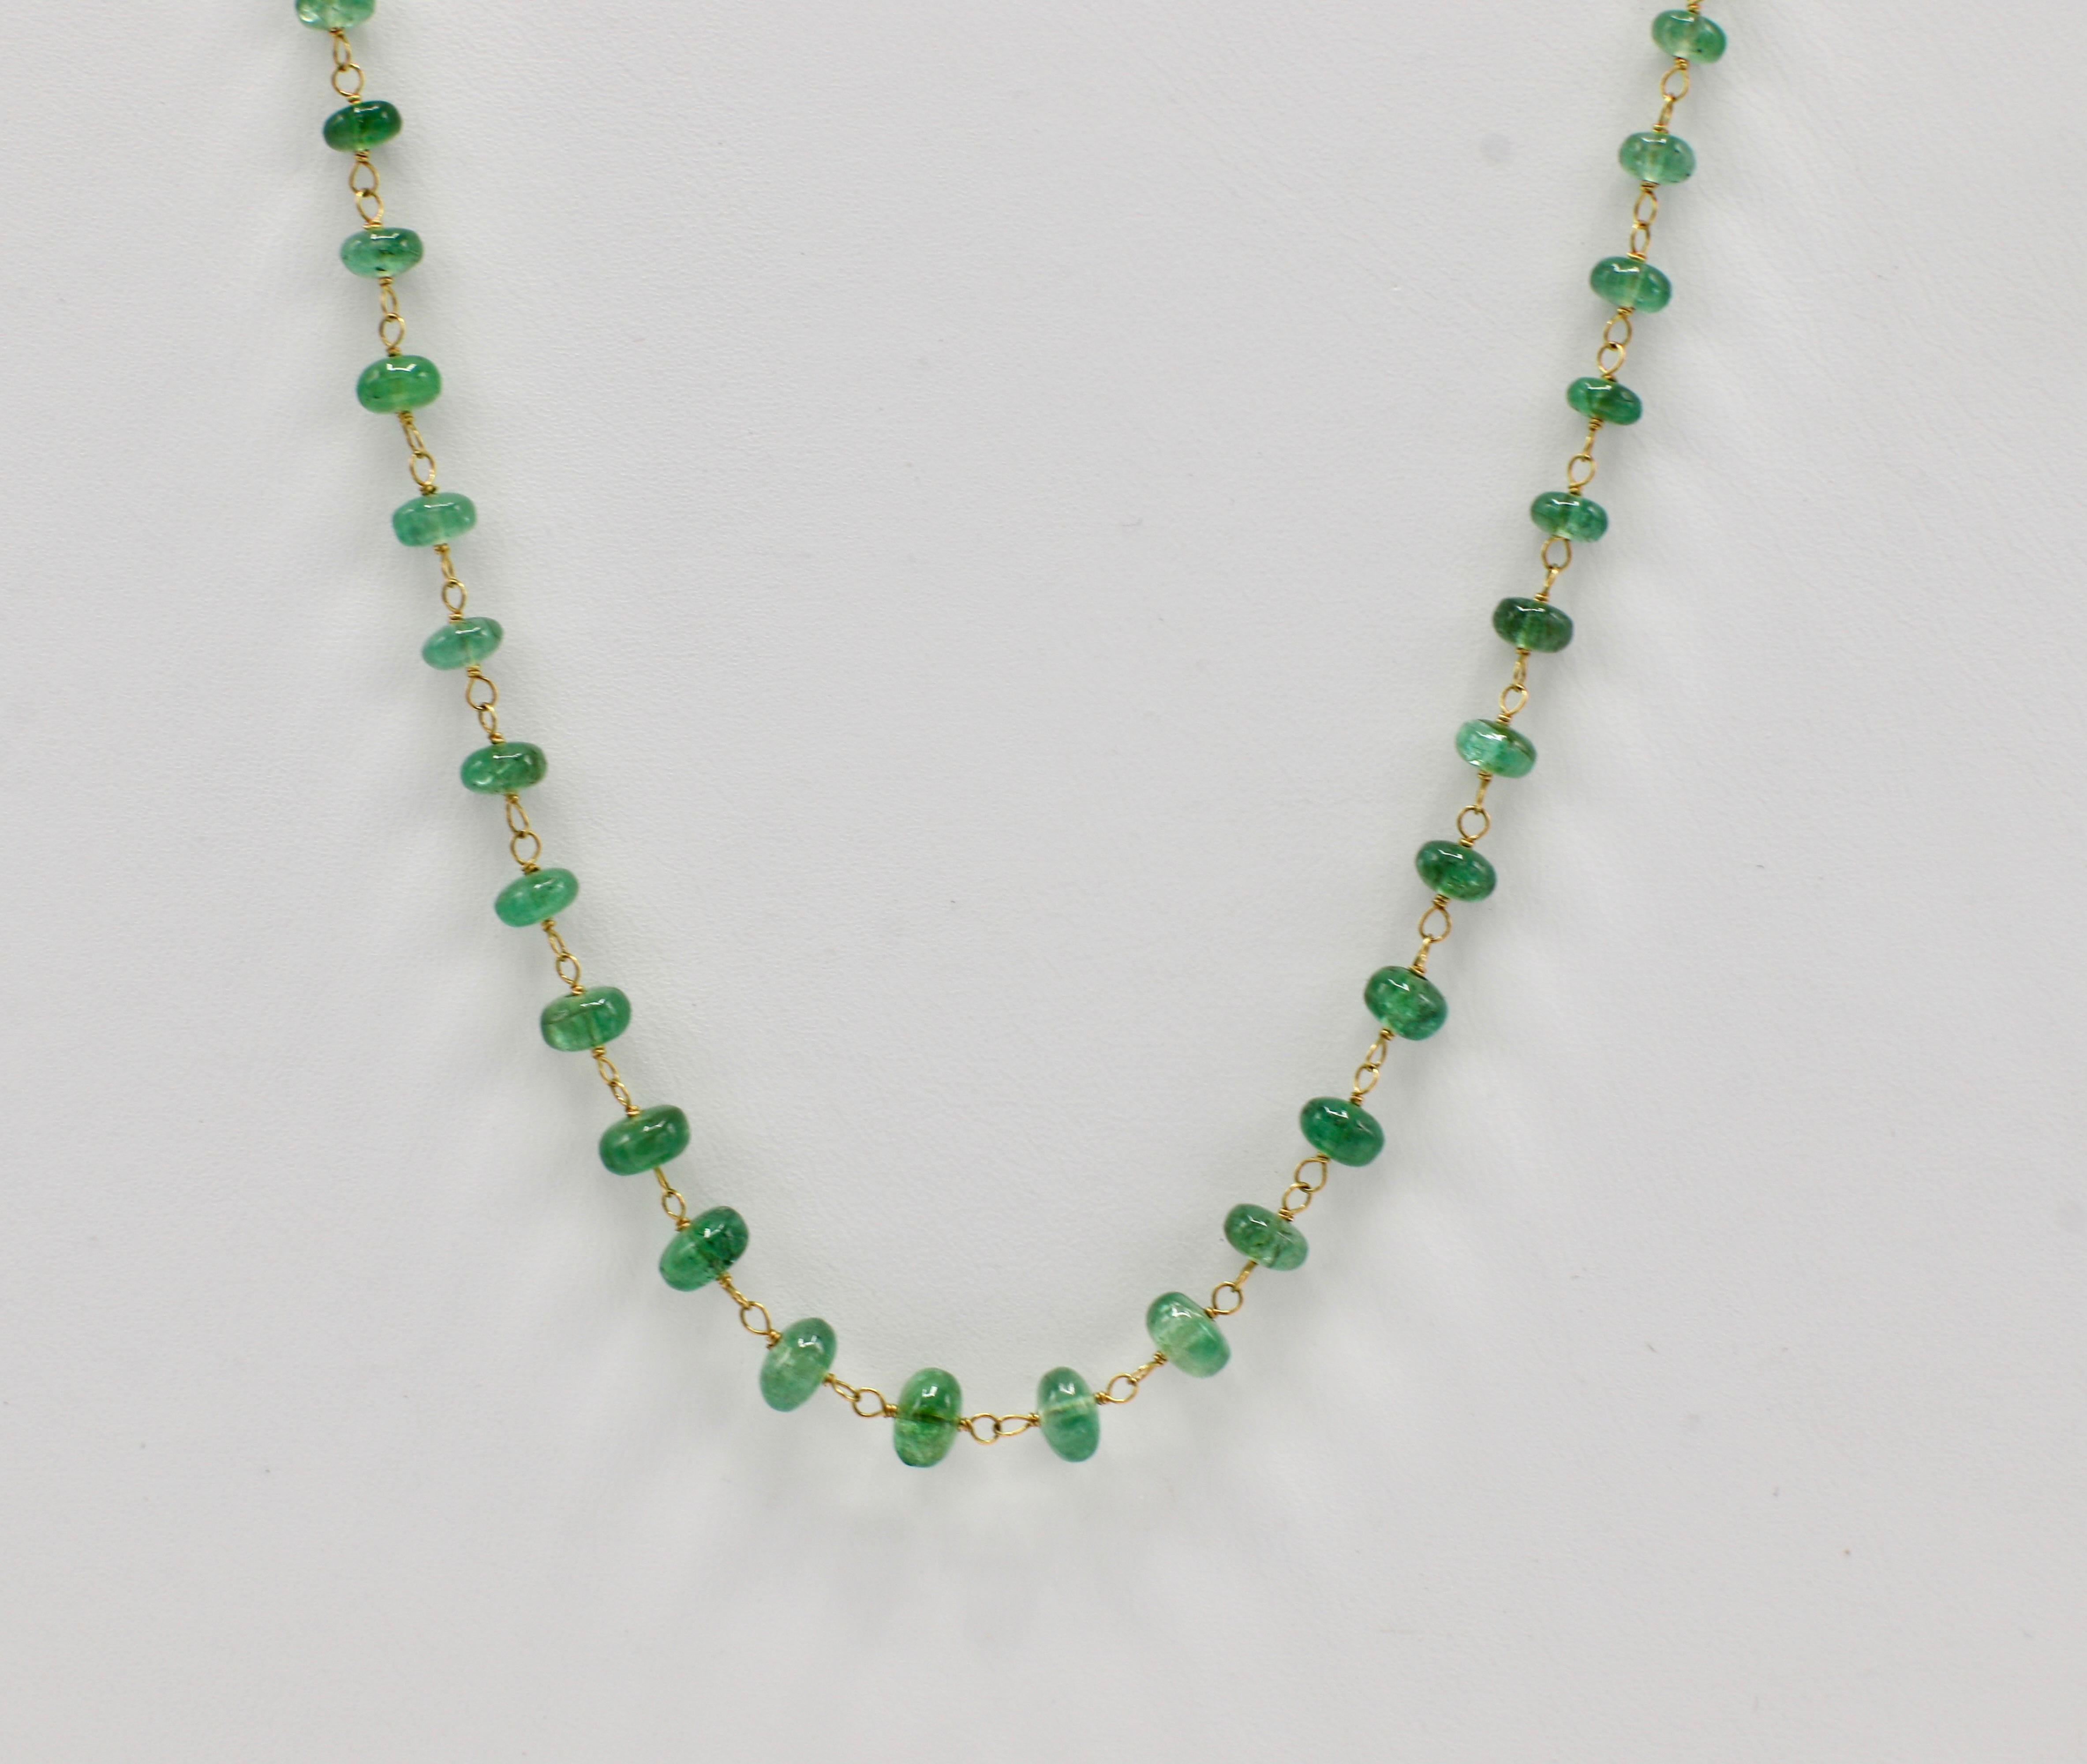 14 Karat Yellow Gold Green Emerald Bead Station Necklace 
Metal: 14k yellow gold
Weight: 5.11 grams
Emerald beads: 3MM - 5MM
Length: 18 inches

